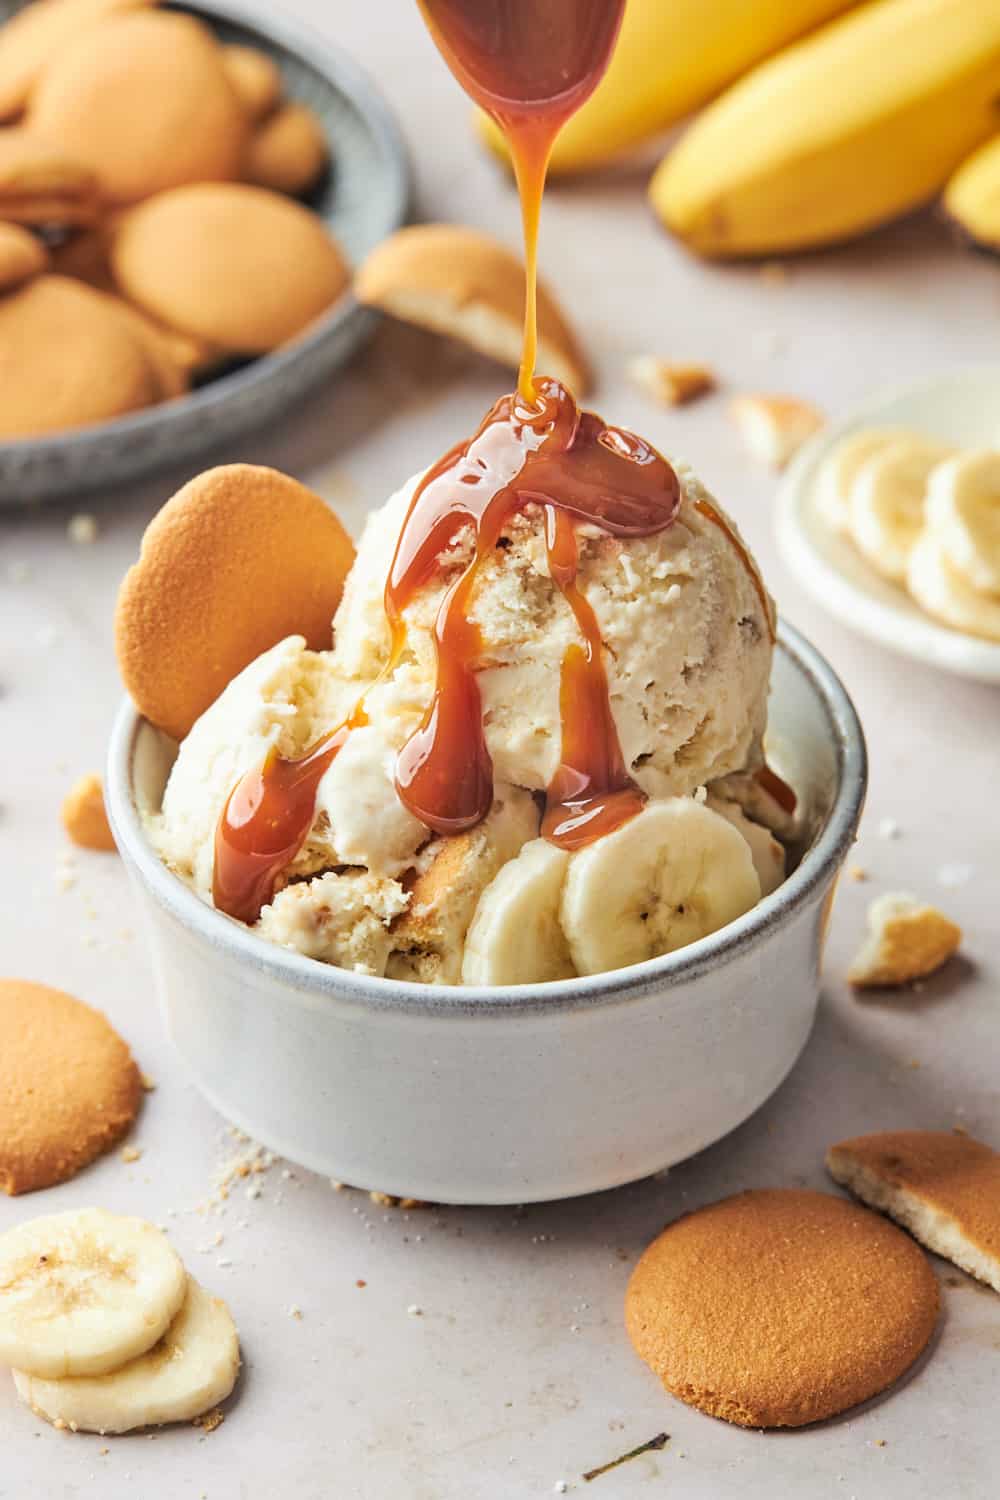 Banana pudding ice cream scoops in a bowl with caramel sauce poured on top